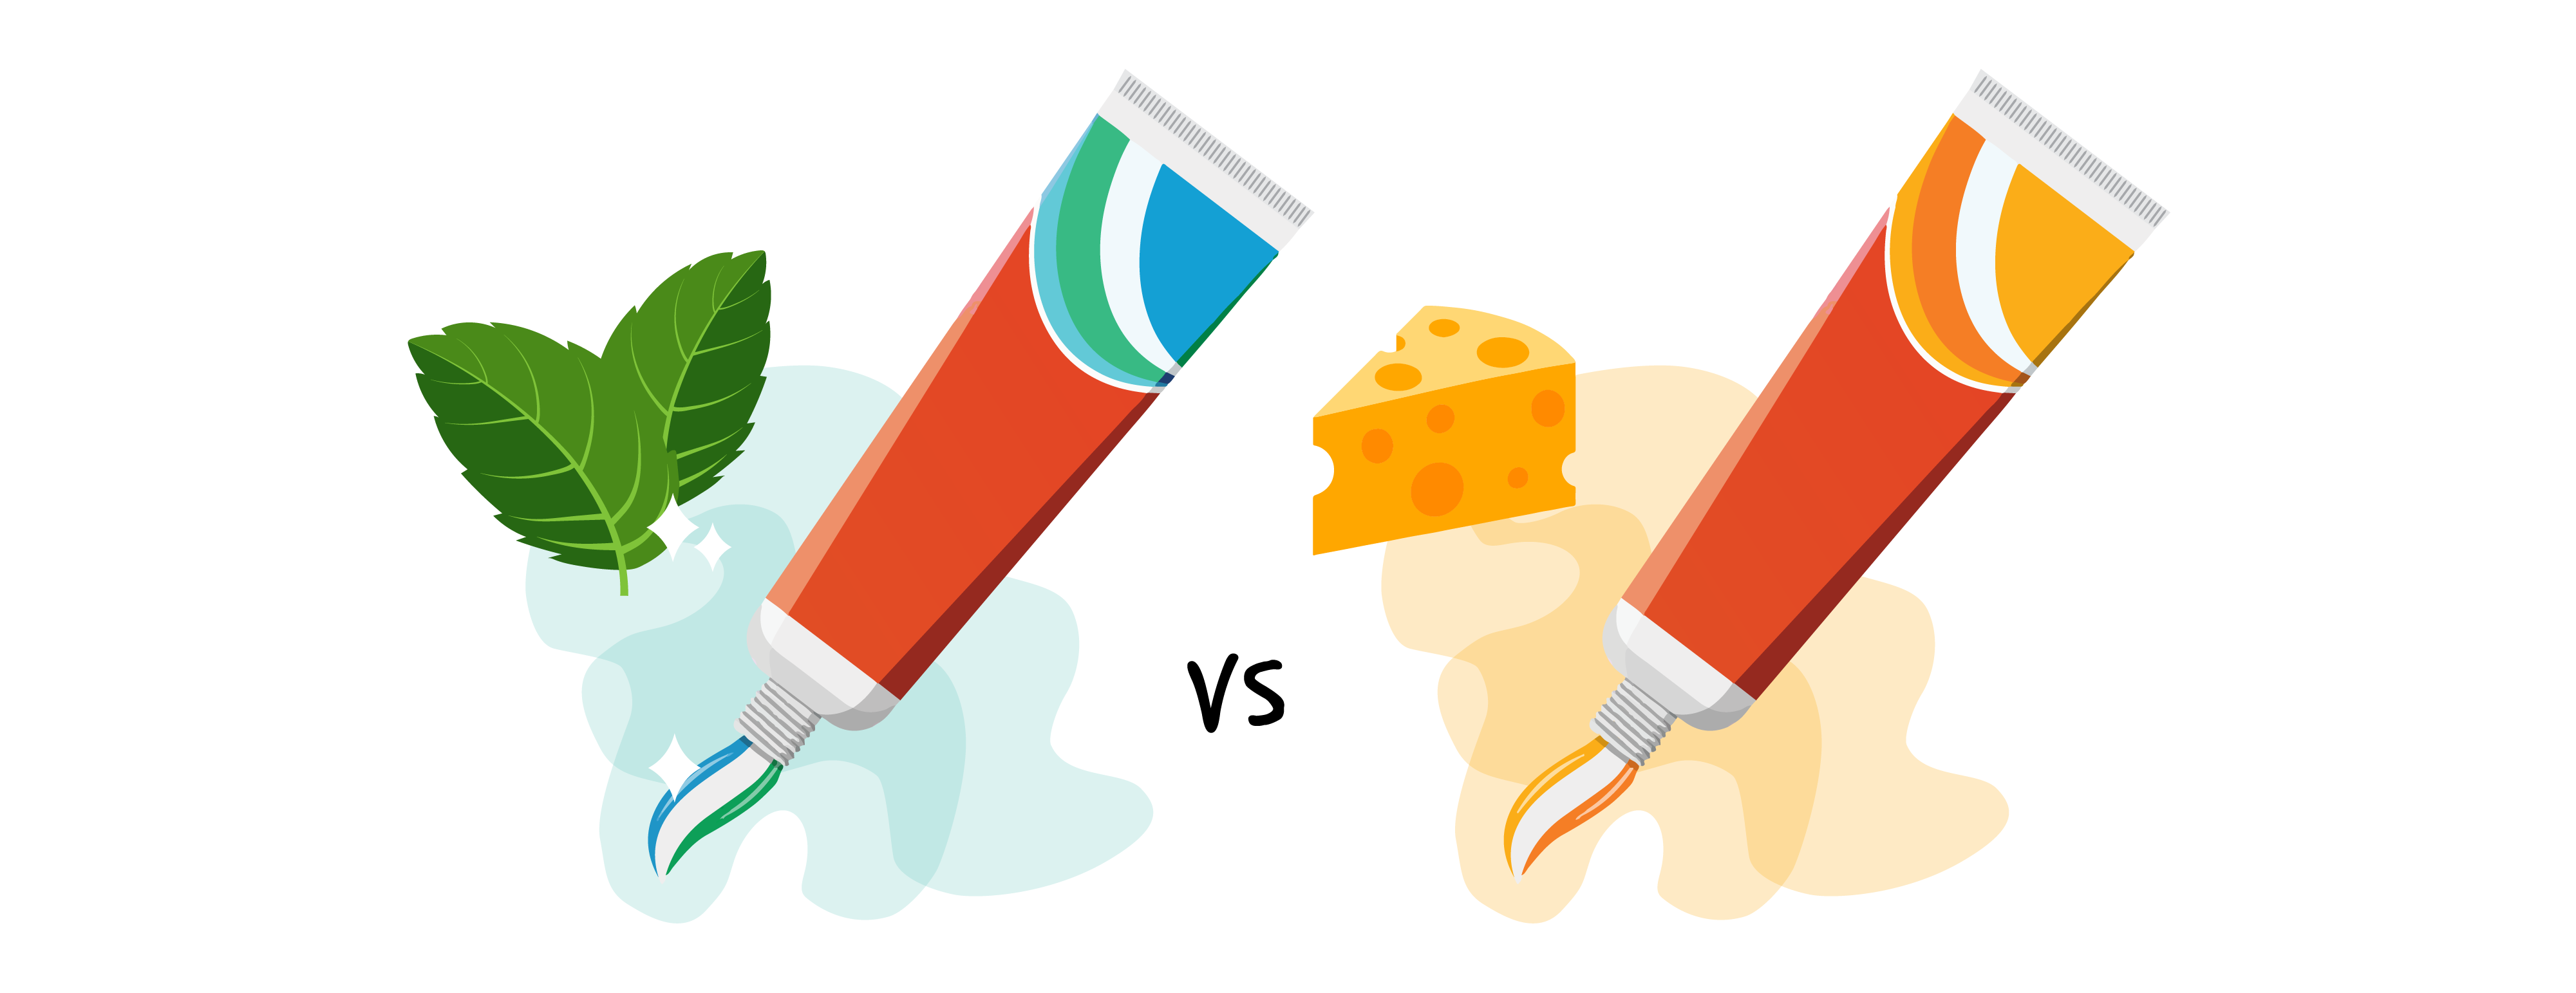 2 tubes of toothpaste. Left: the tube has blue and teal details with two mint leaves next to it. Center: versus text. Right: the tube has orange and yellow details with a slice of cheese next to it.